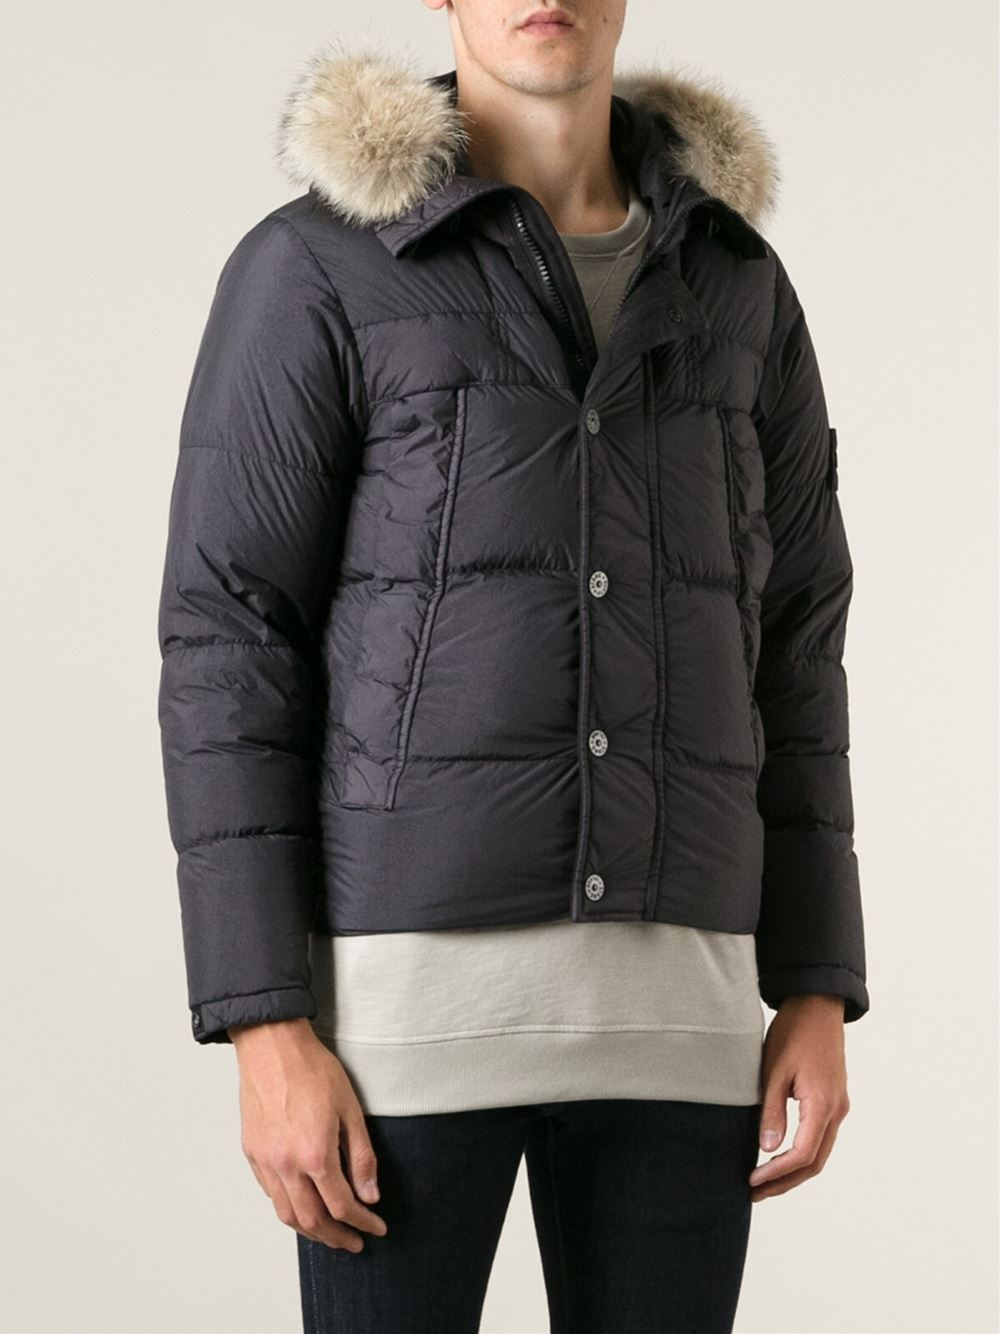 Lyst - Stone Island Faux-fur Trimmed Hood Padded Jacket in Gray for Men